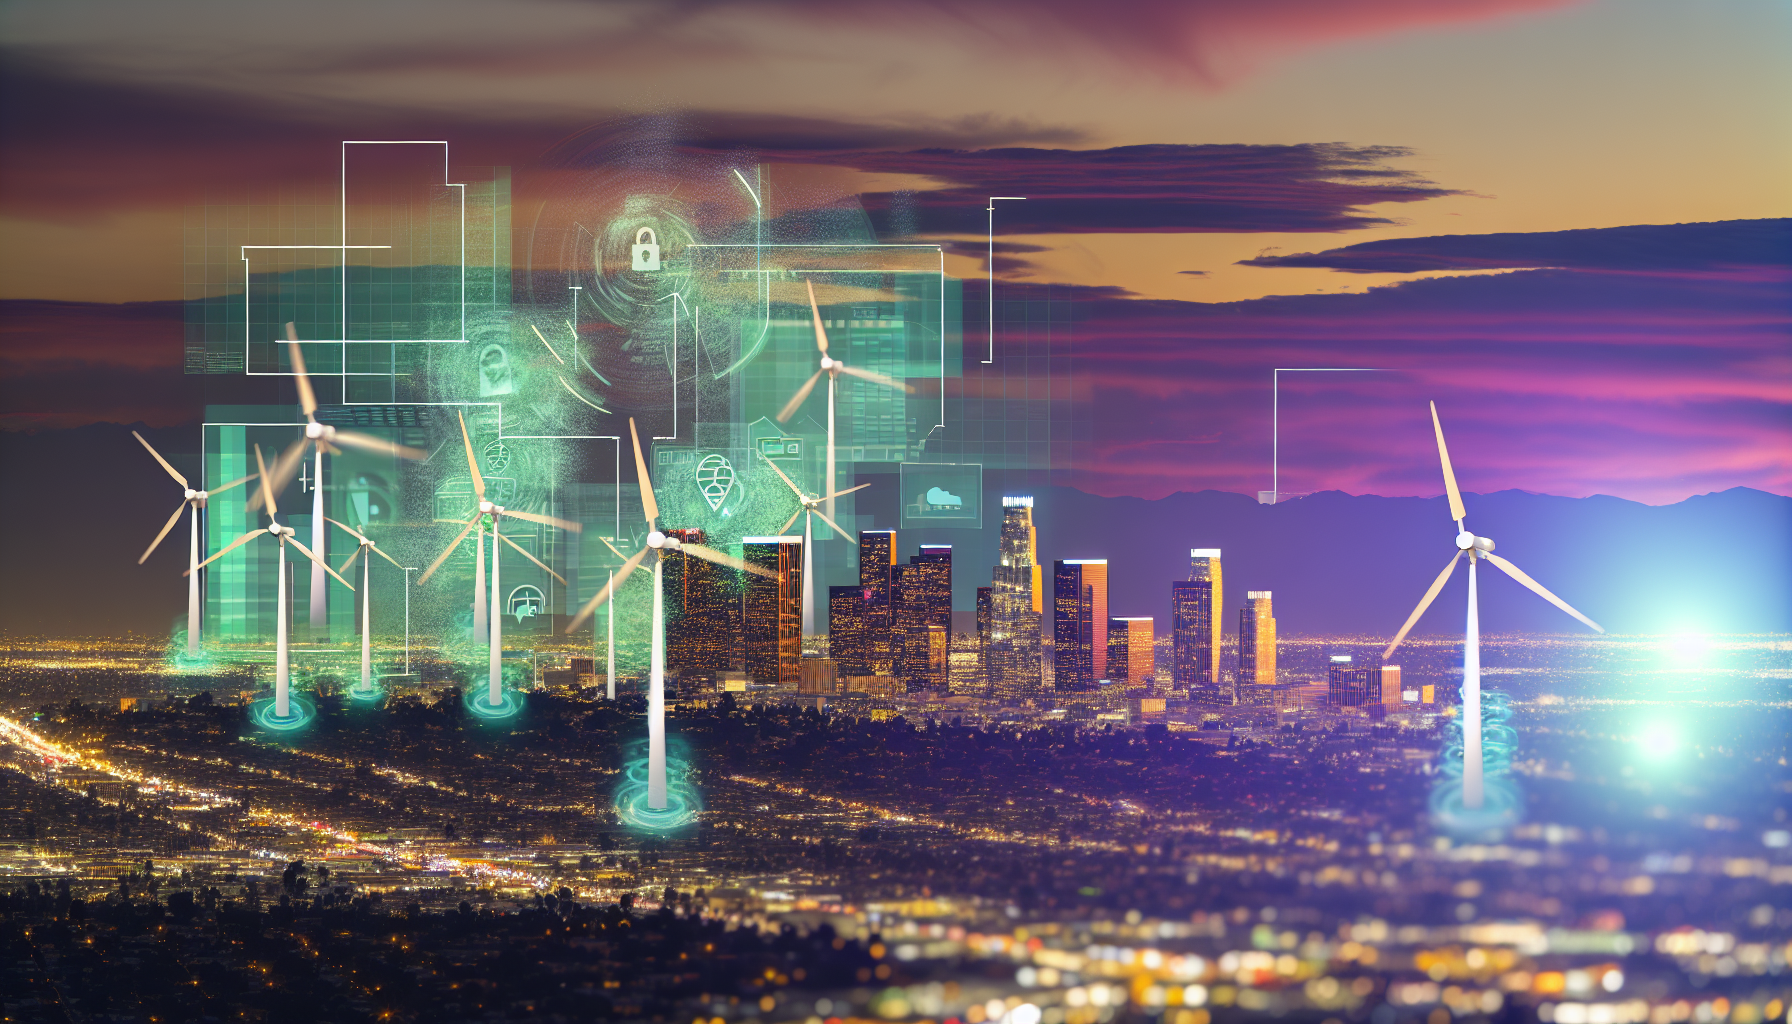 A skyline view of Los Angeles with smart buildings and digital overlays representing real estate technology